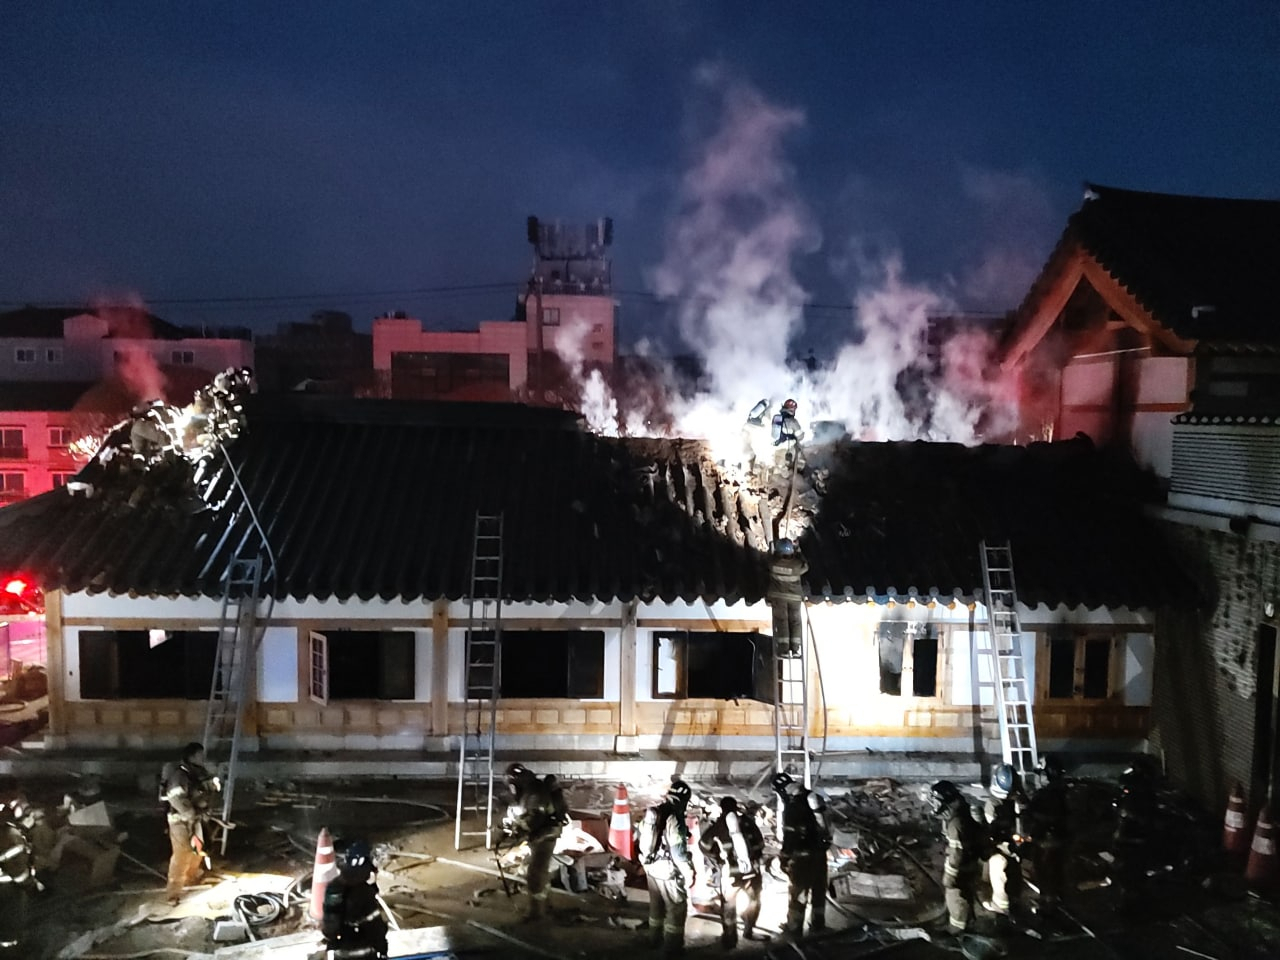 (Photo provided by Gyeonggi-do Fire Services)